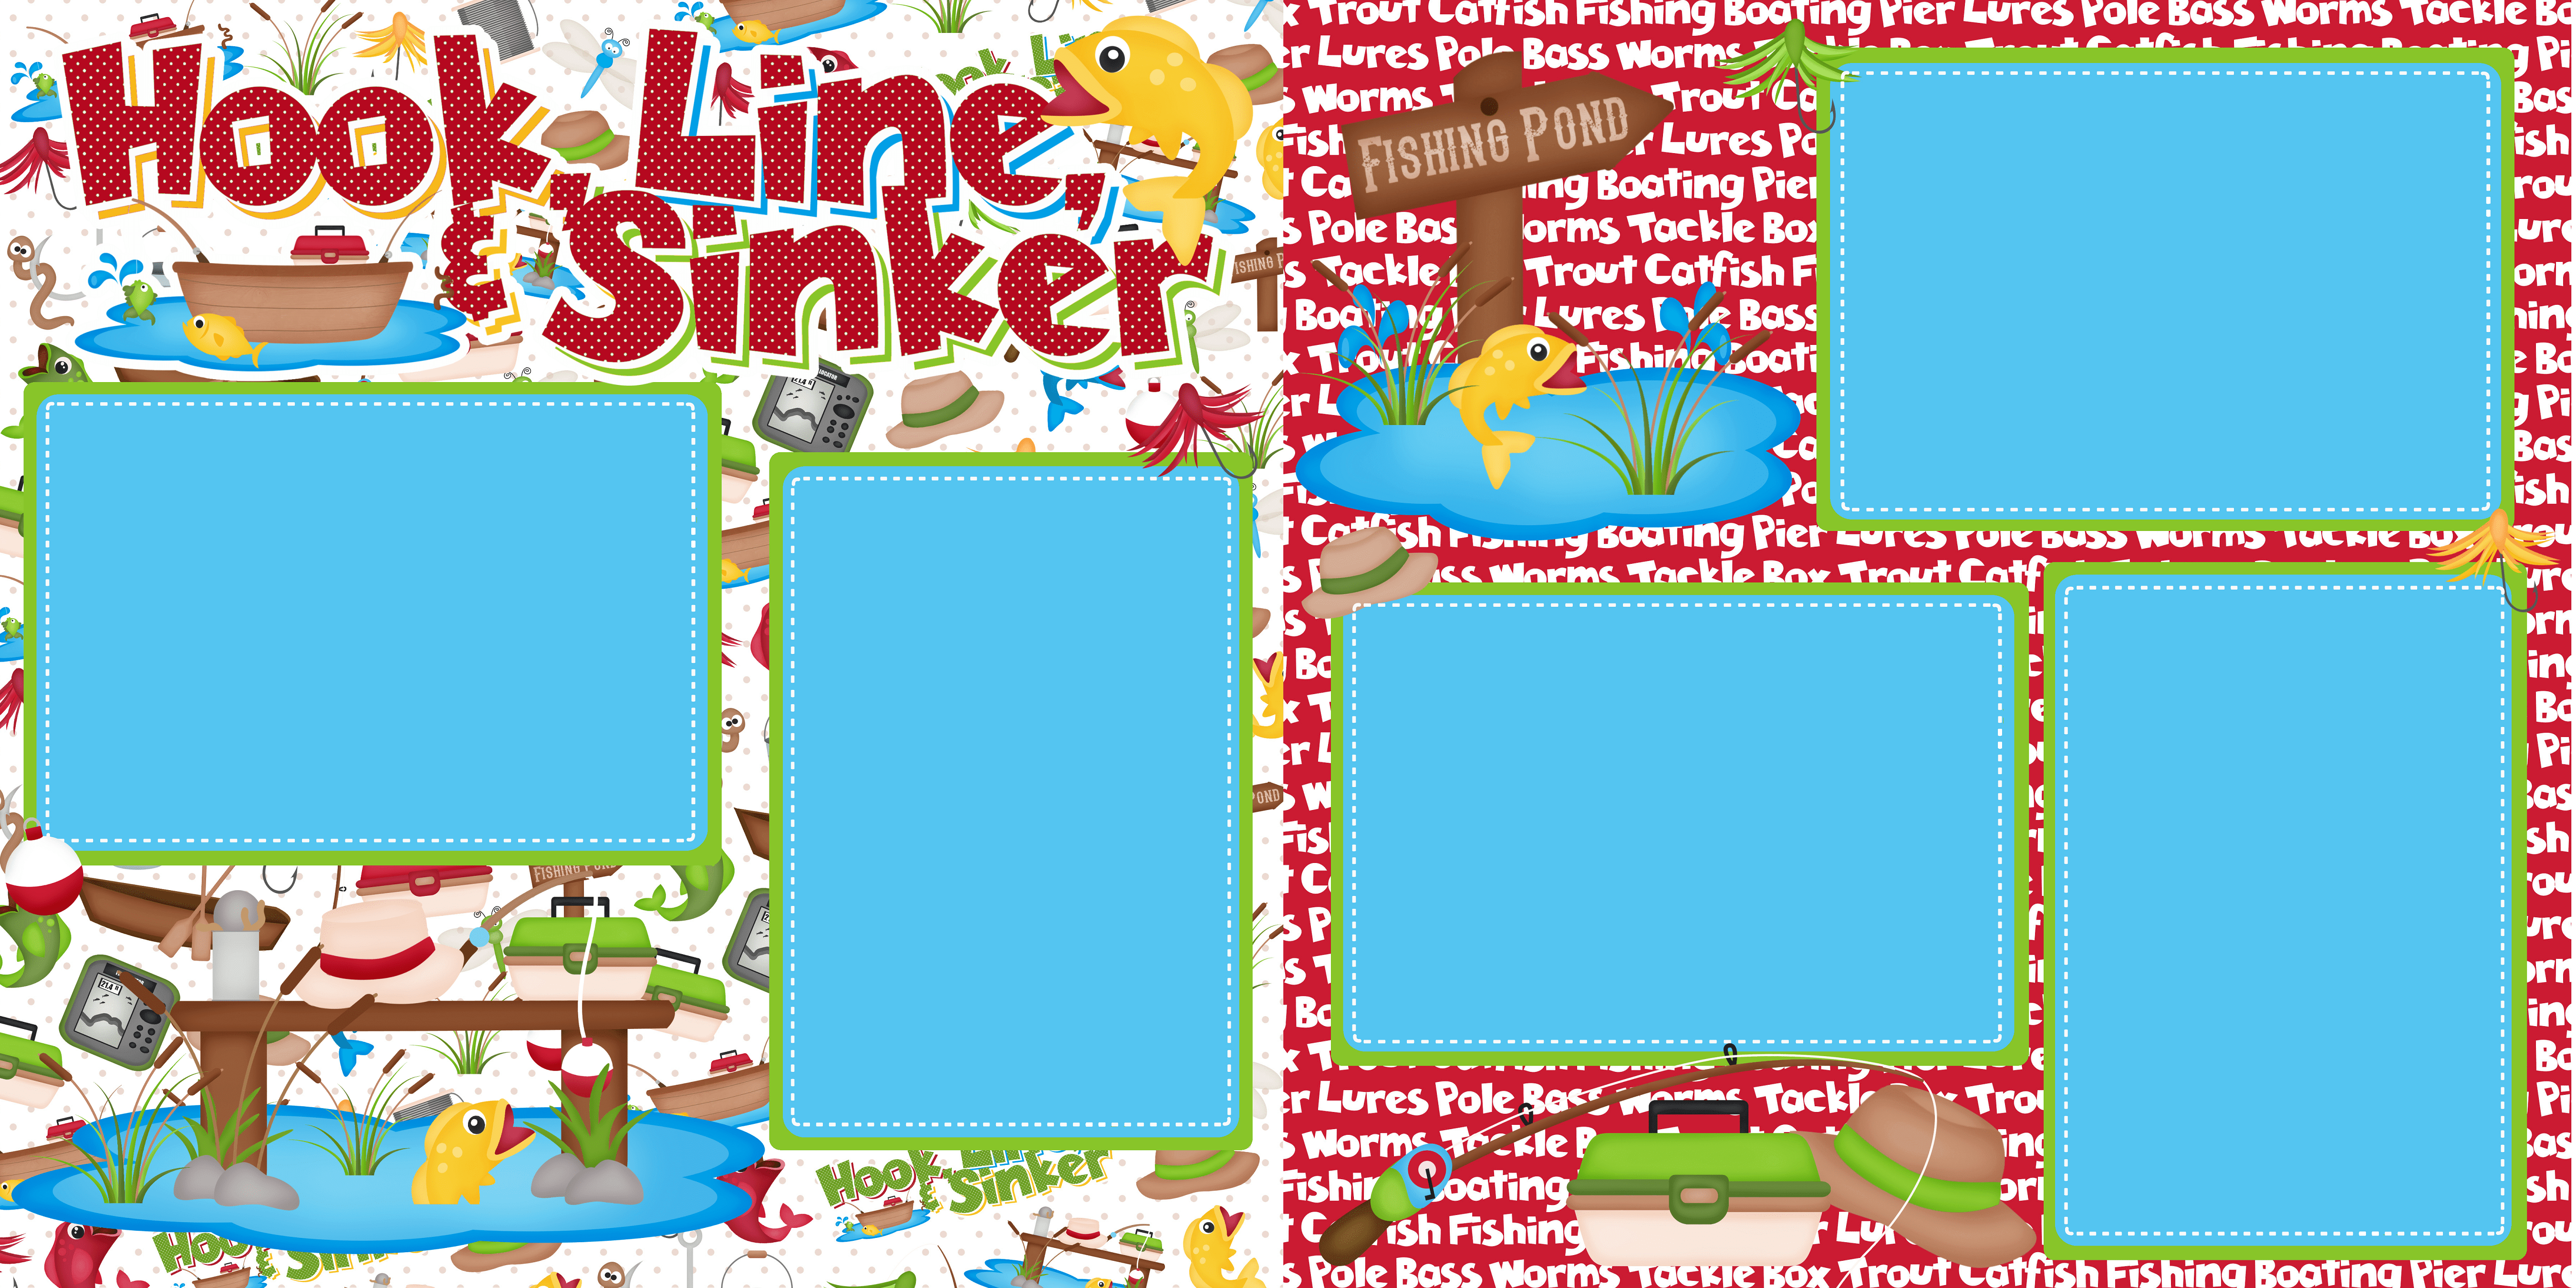 Hook, Line & Sinker Collection Let's Go Fishing (2) - 12 x 12 Premade, Printed Scrapbook Pages by SSC Designs